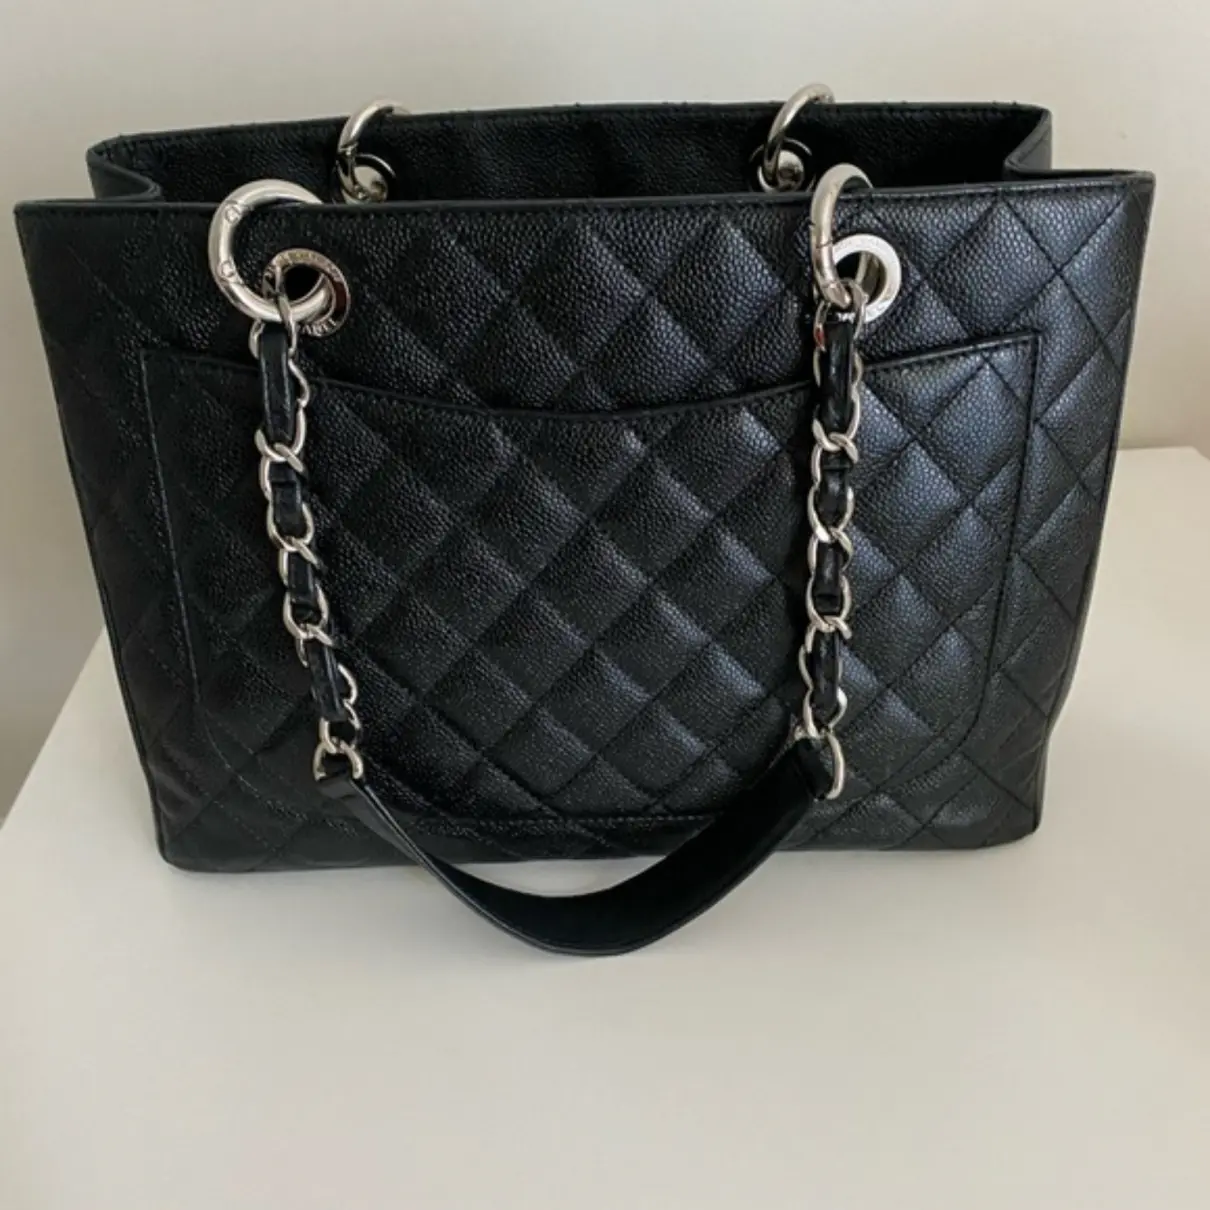 Buy Chanel Grand shopping leather tote online